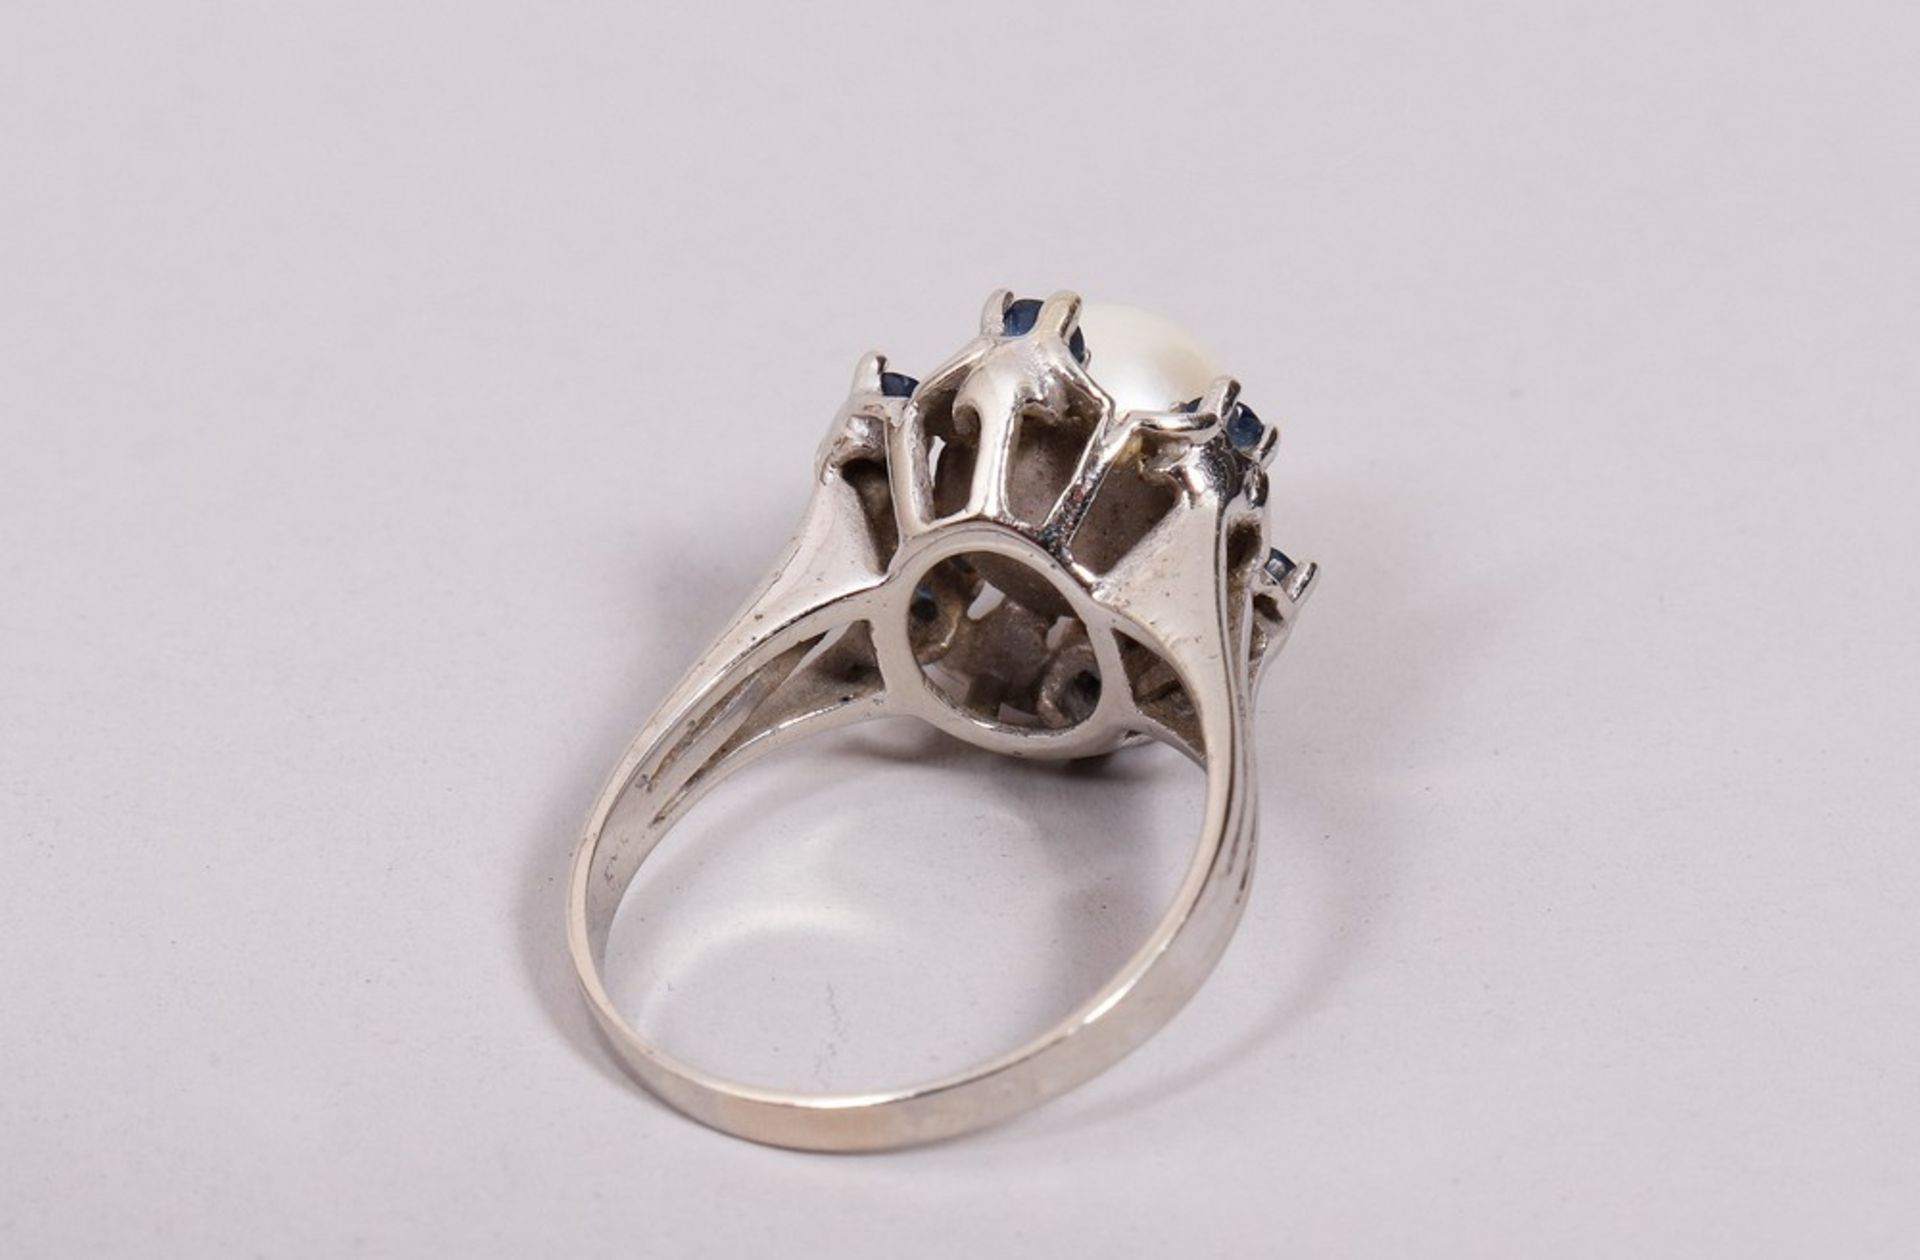 Pearl ring, 585 white gold, 20th C. - Image 3 of 5